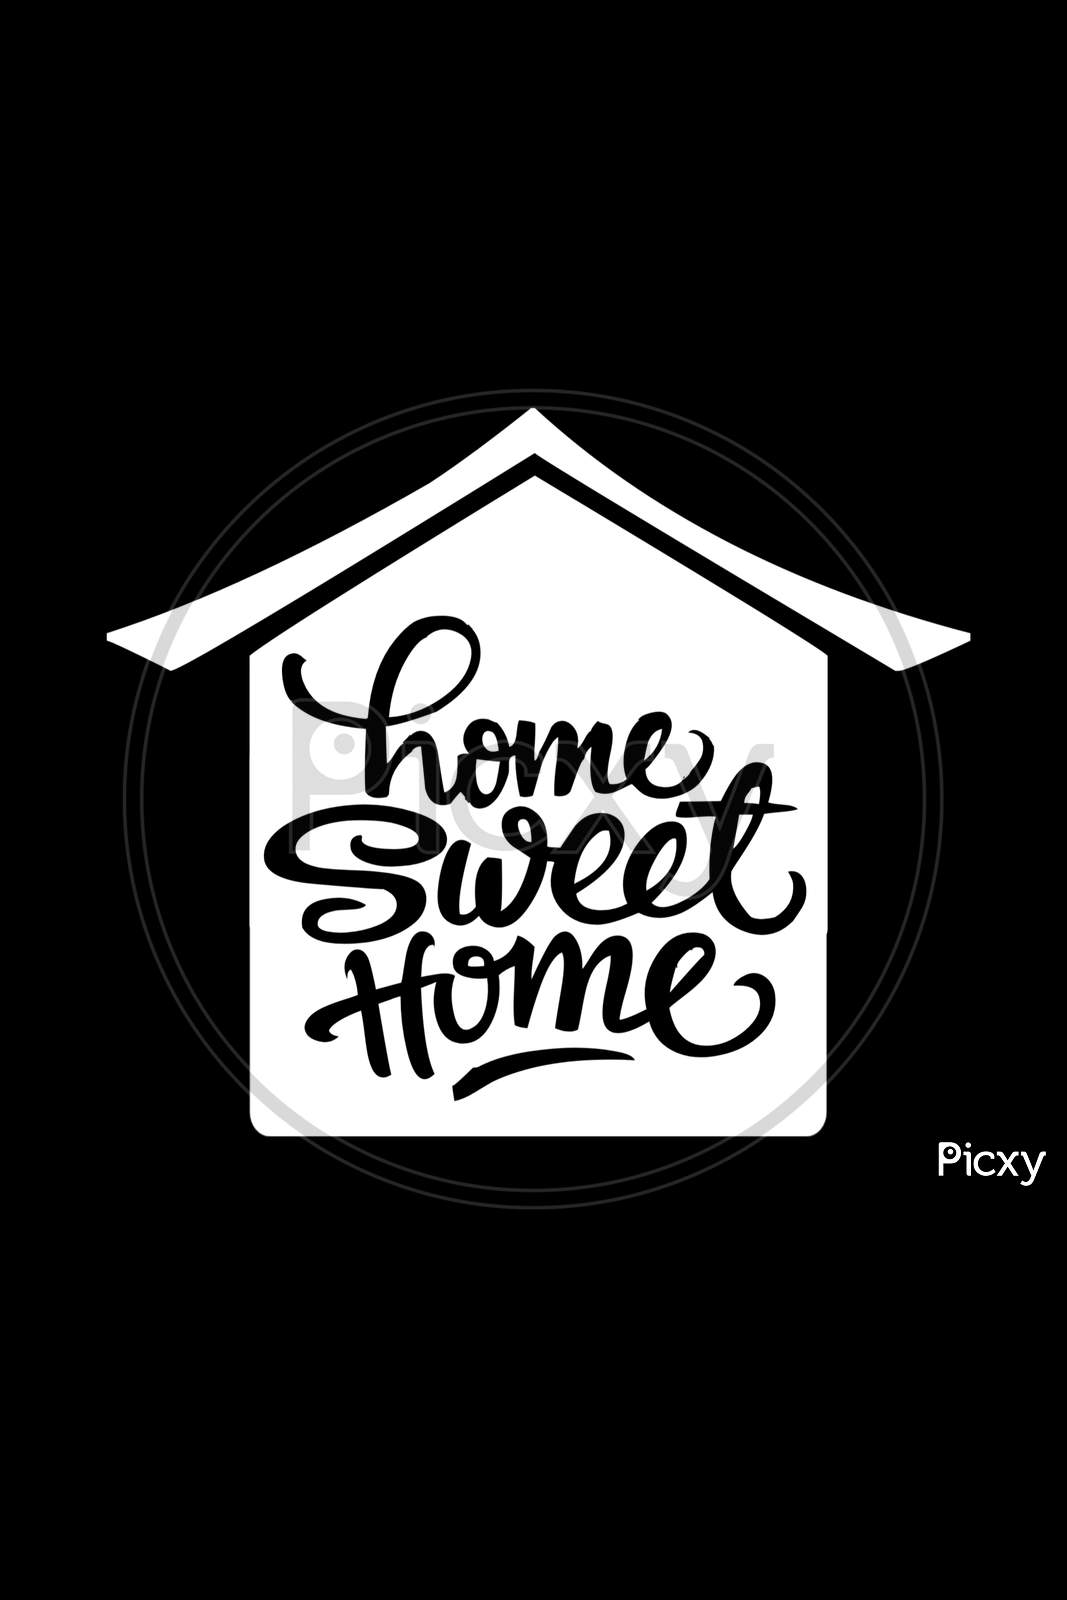 Home Sweet Home (black background with black color fonts)